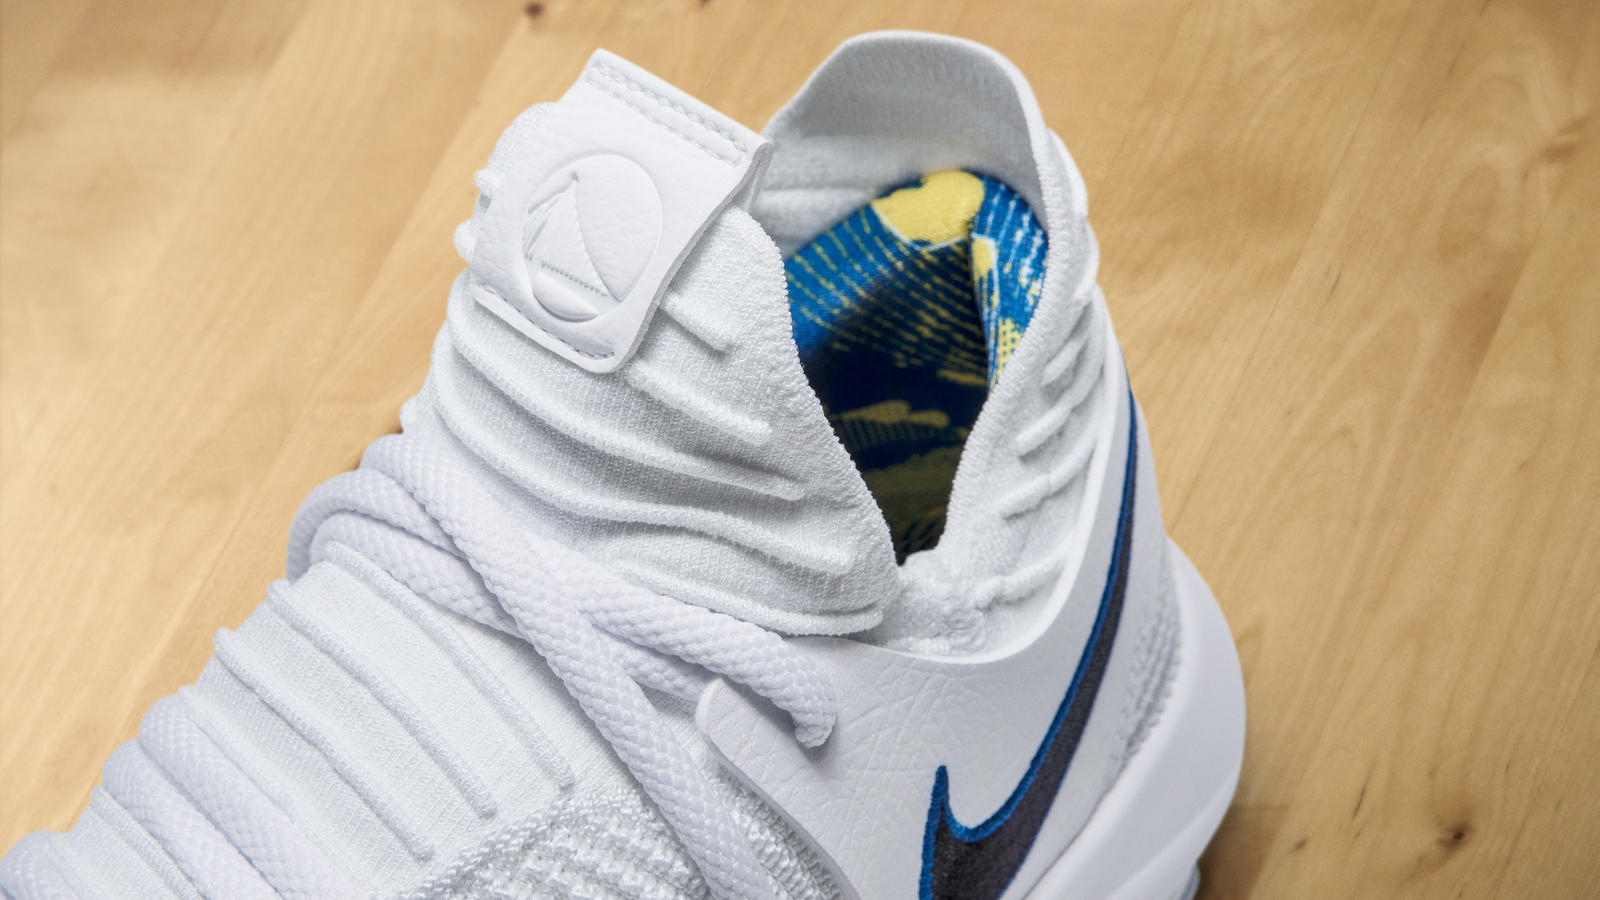 nike kd 10 numbers golden state warriors 2